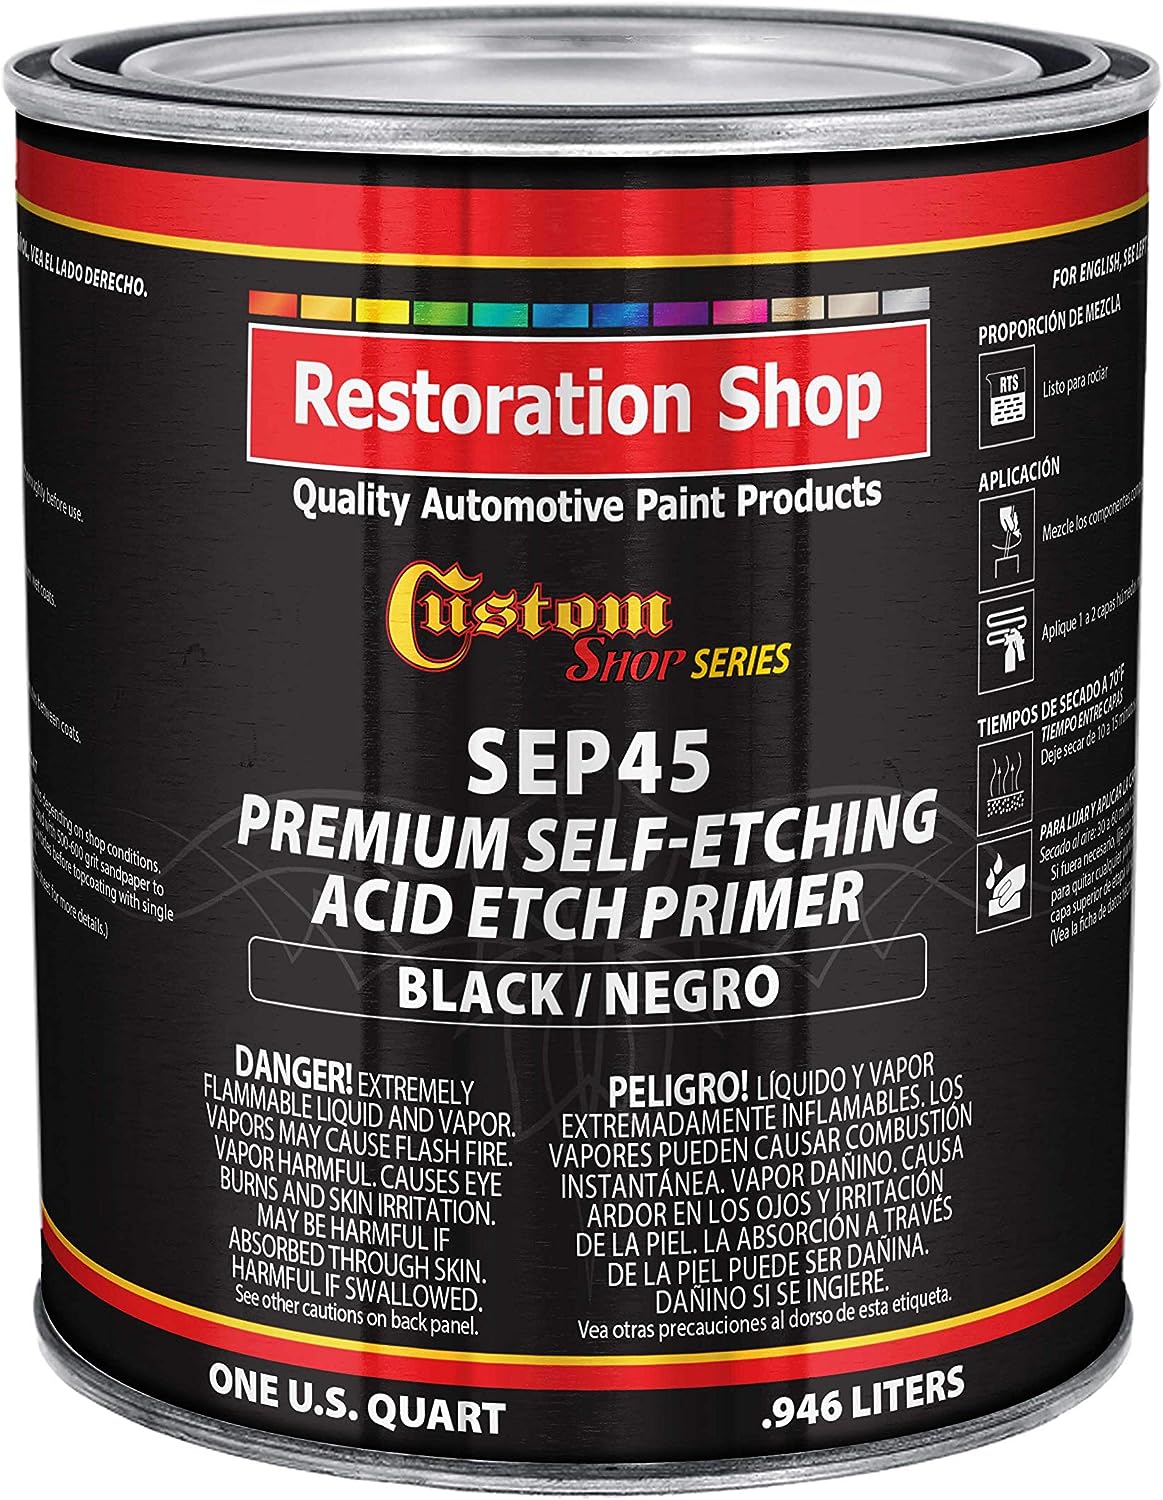 paint to use on aluminum detailed review